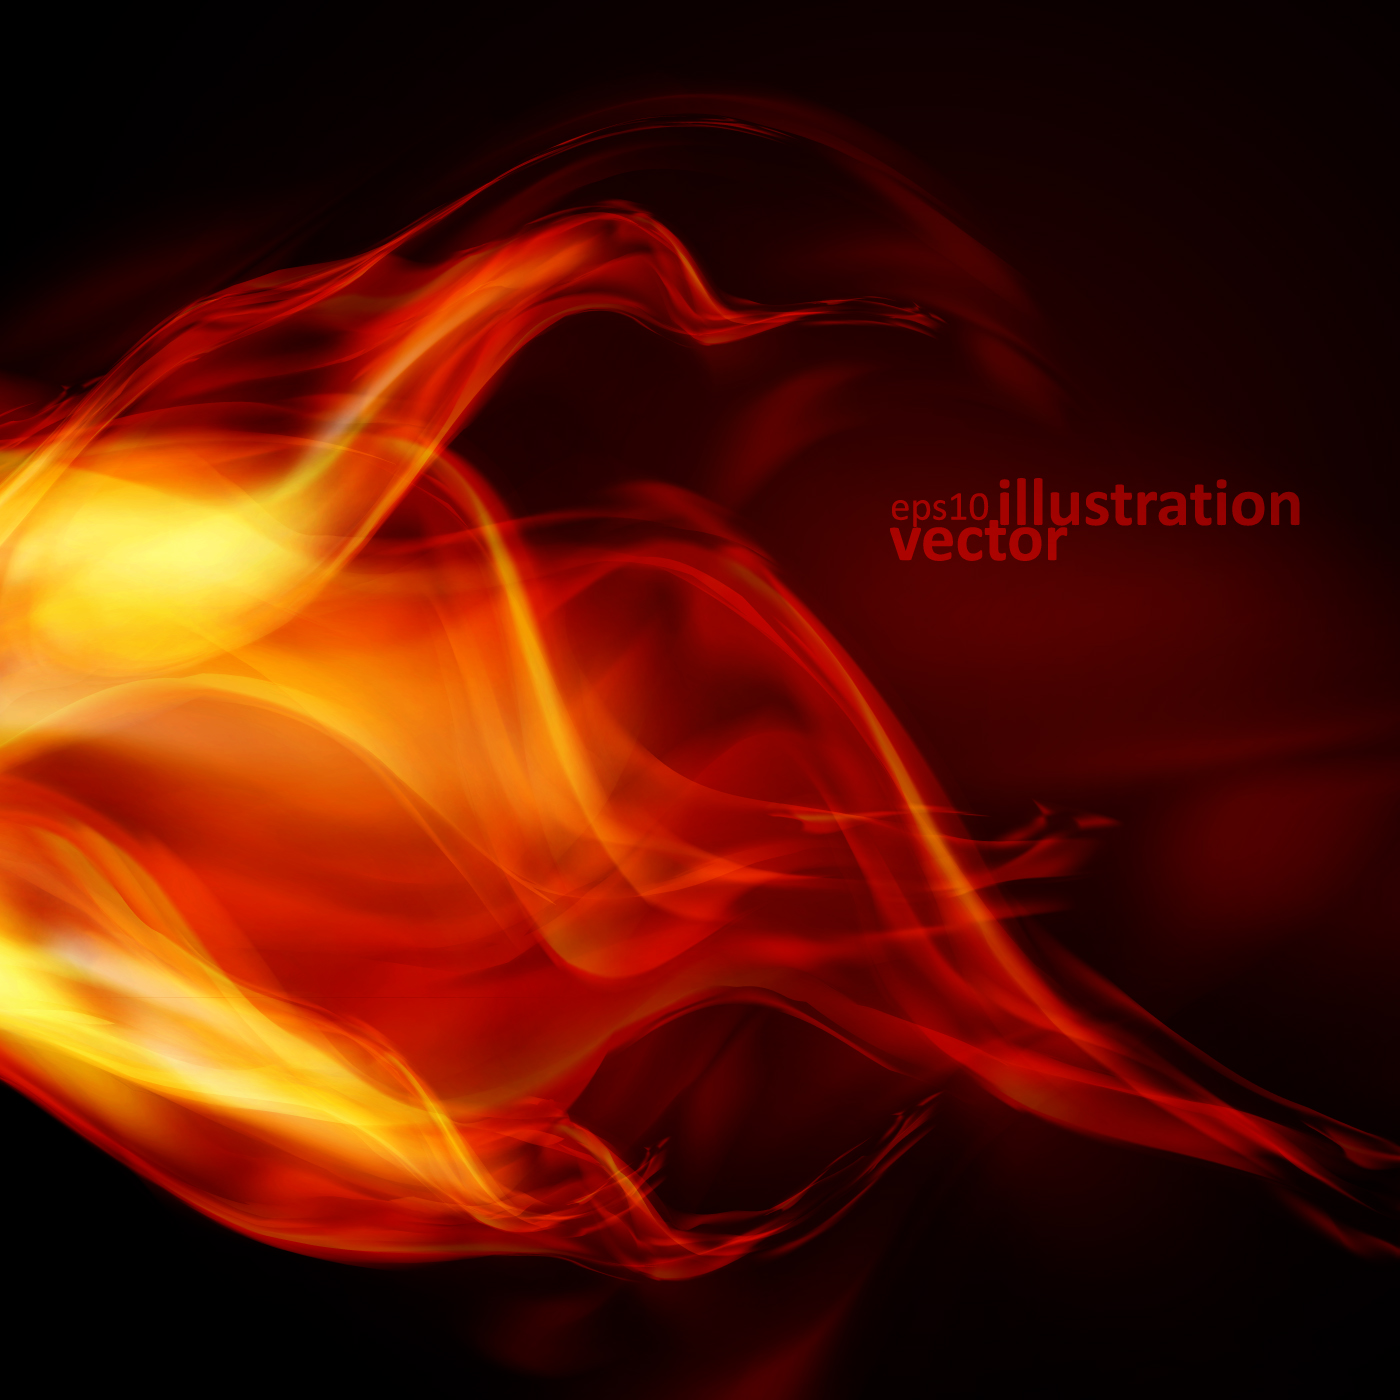 Realistic fiery background illustration vector 01